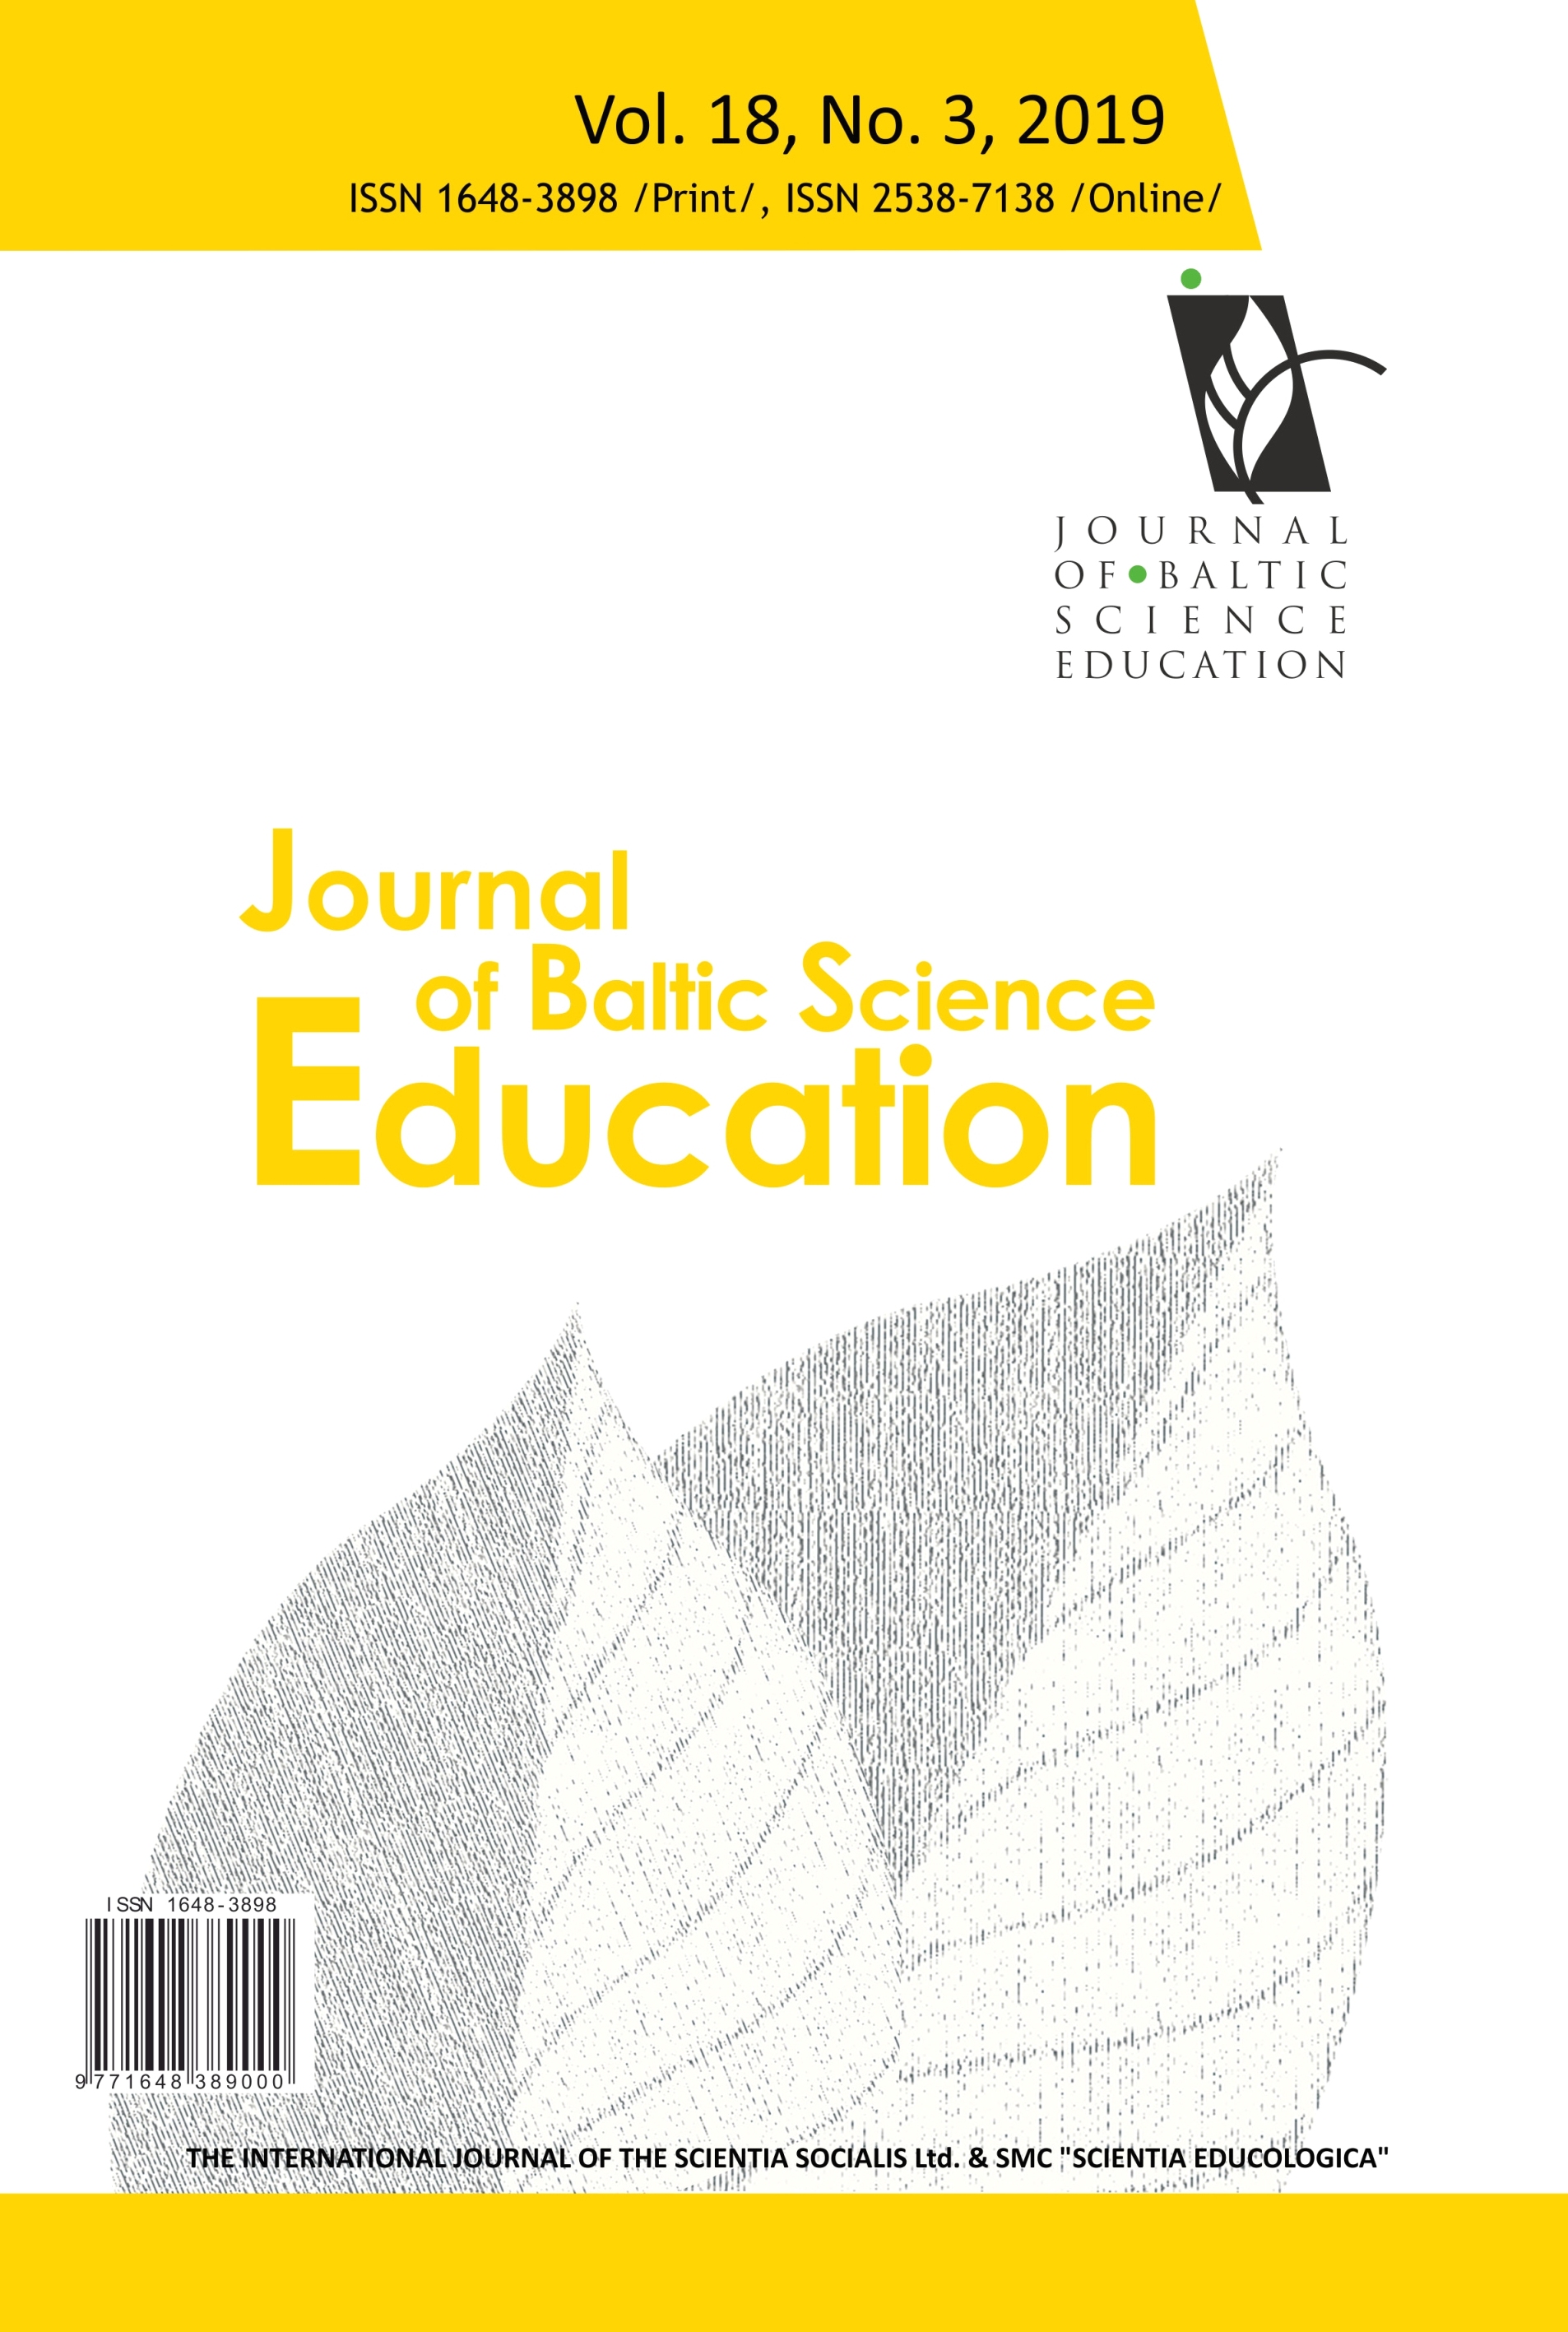 THE EFFECT OF COMPUTER-AIDED 3D MODELING ACTIVITIES ON PRE-SERVICE TEACHERS’ SPATIAL ABILITIES AND ATTITUDES TOWARDS 3D MODELING Cover Image